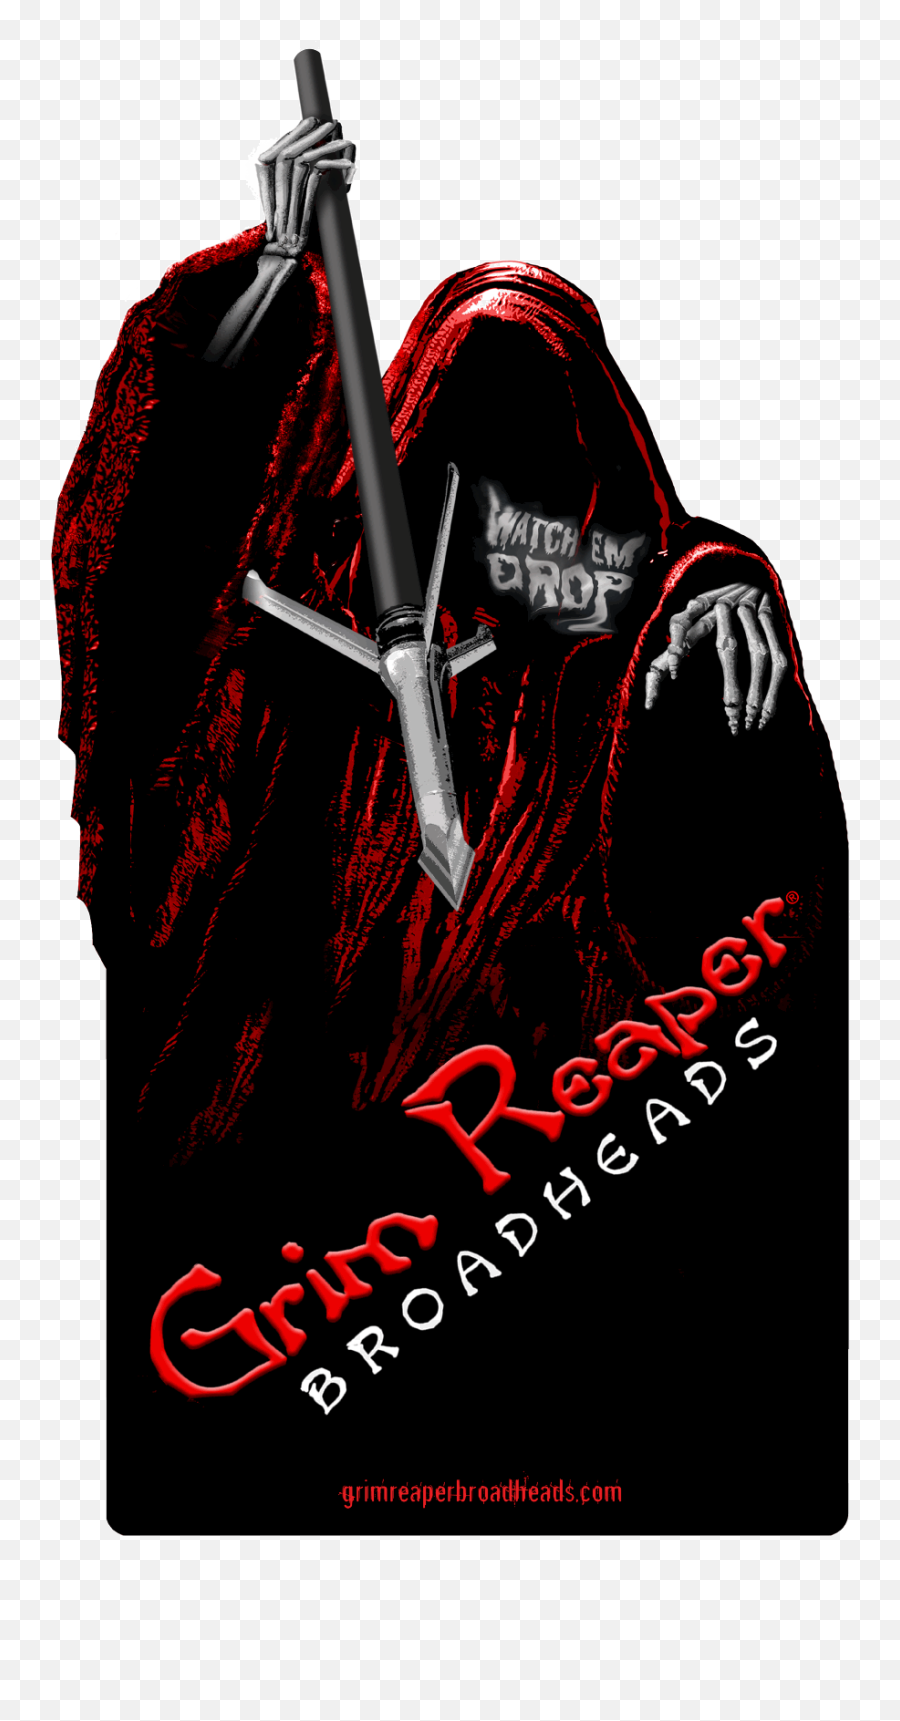 Bowhunting 101 Grim Reaper Broadheads And Gold Tip Arrows - Grim Reaper Broadheads Logo Png,Grim Reaper Logo